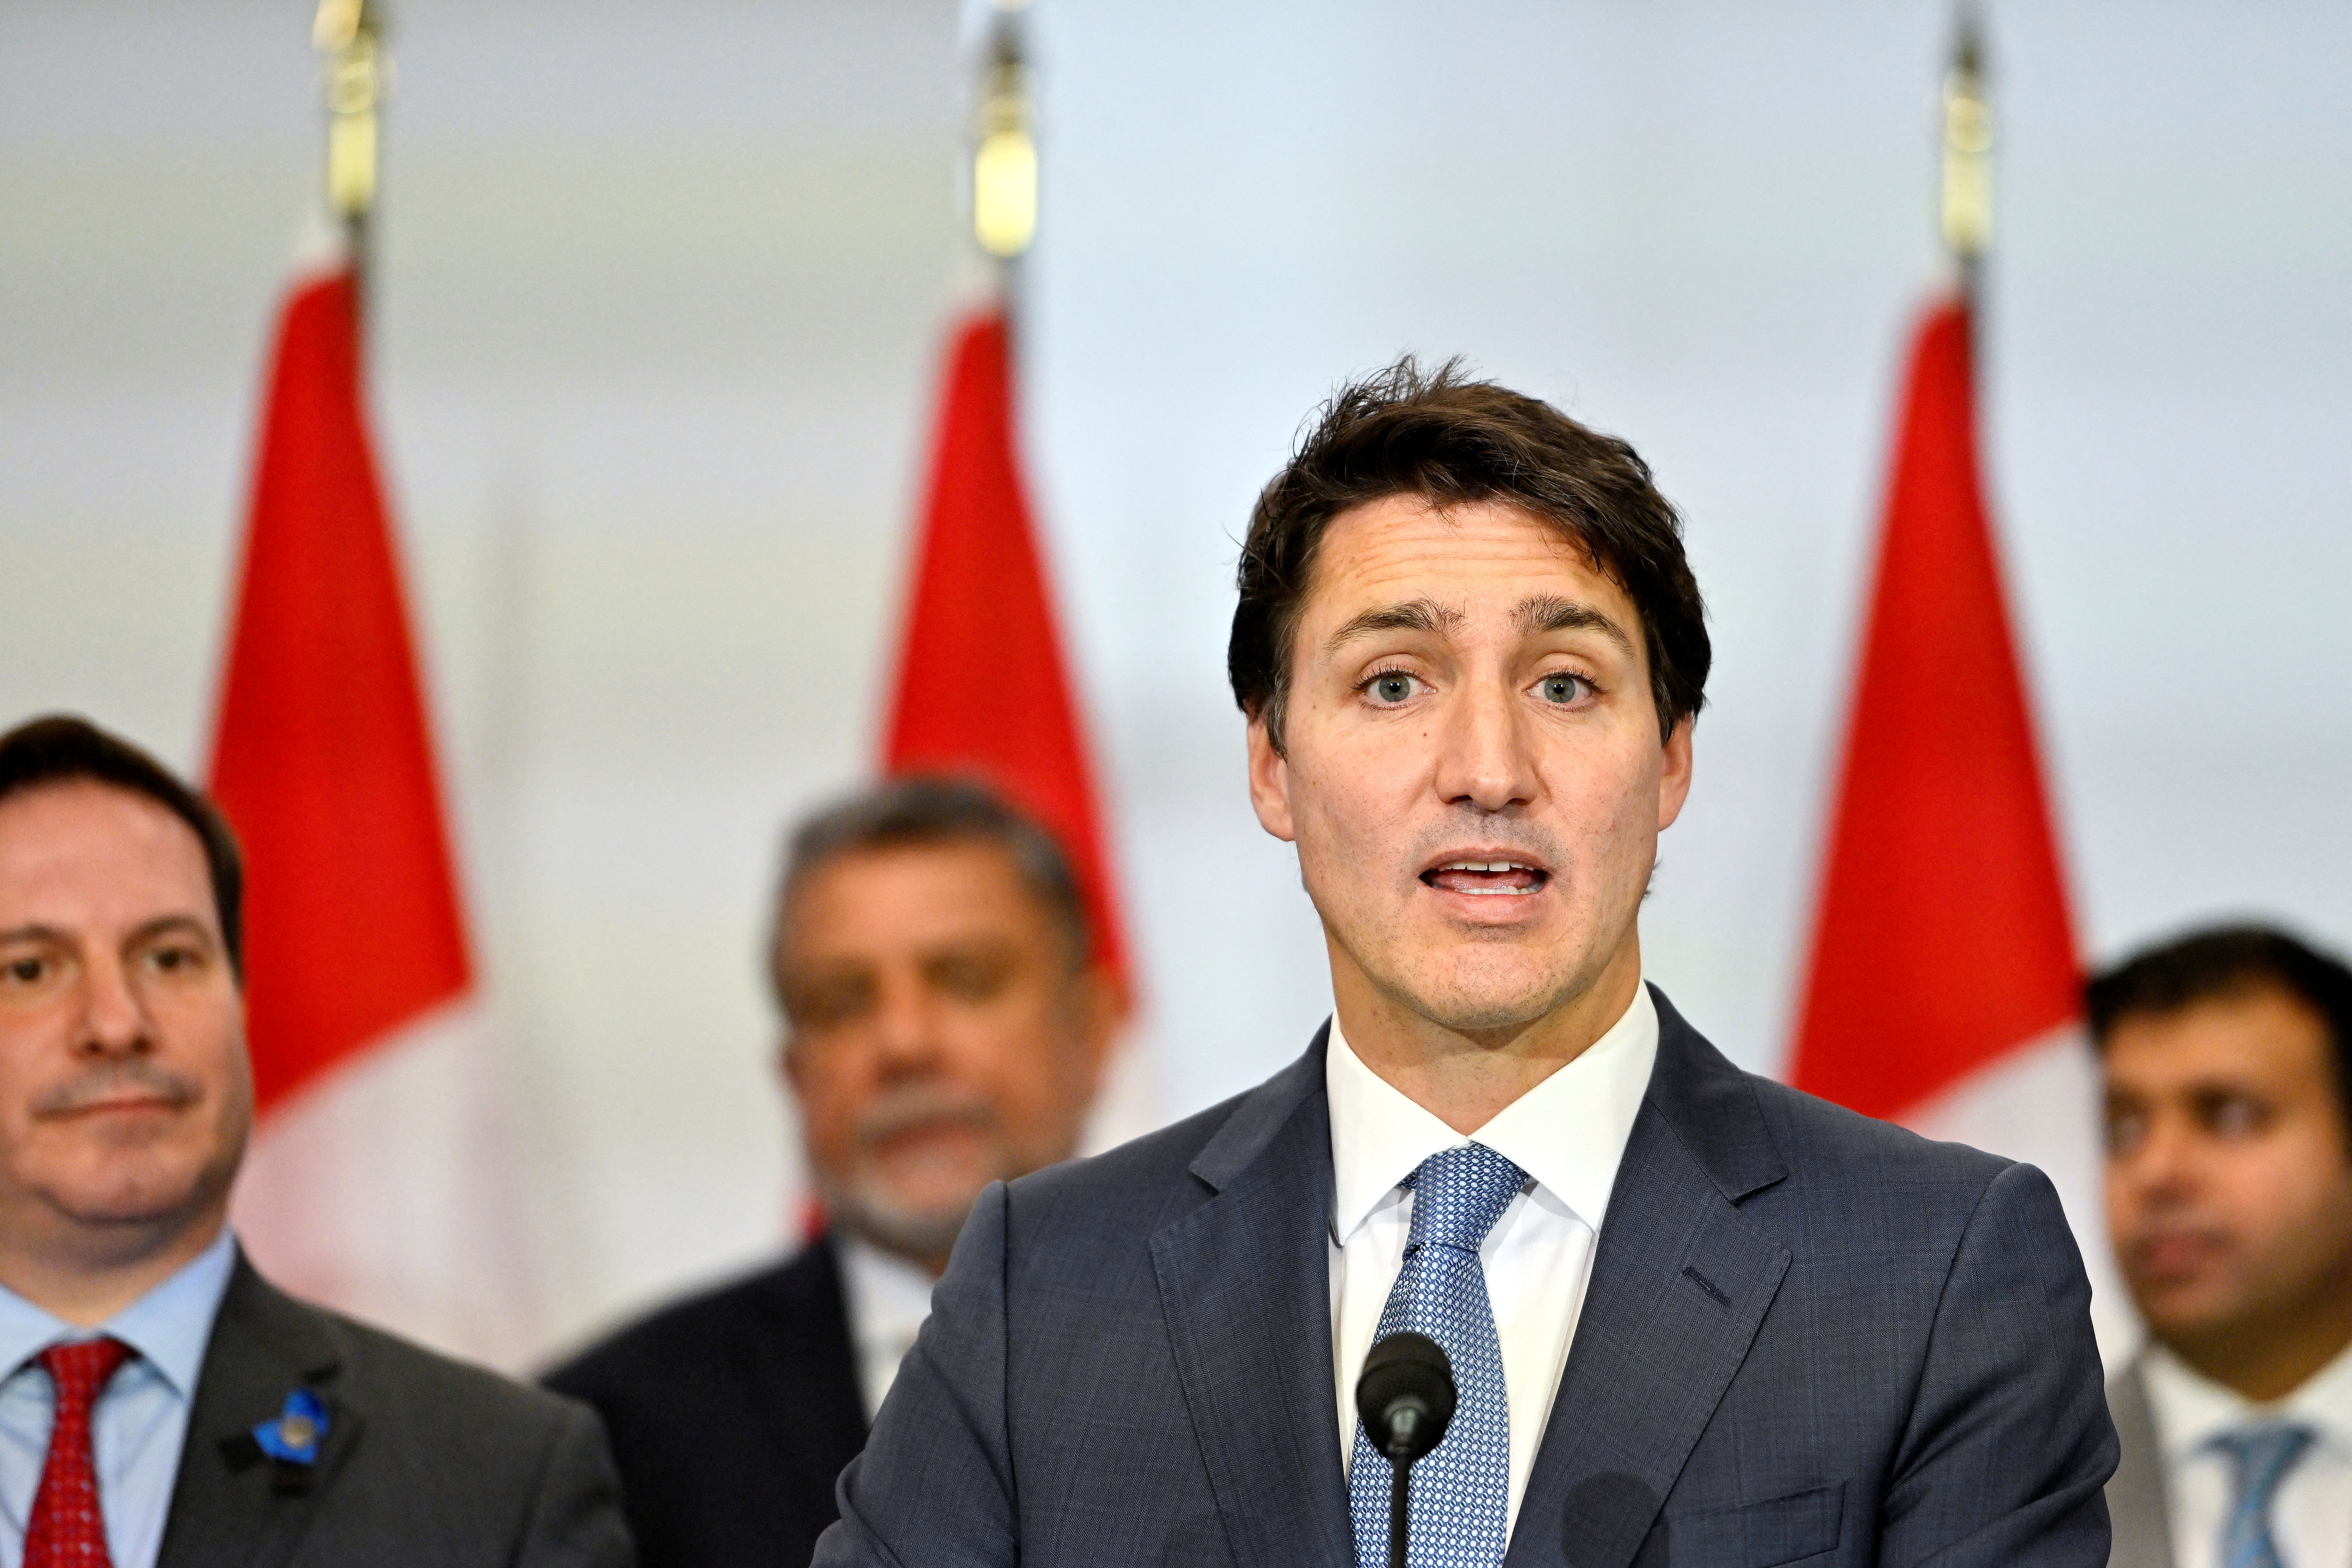 Canada's Prime Minister Justin Trudeau holds a press conference in Surrey, British Columbia